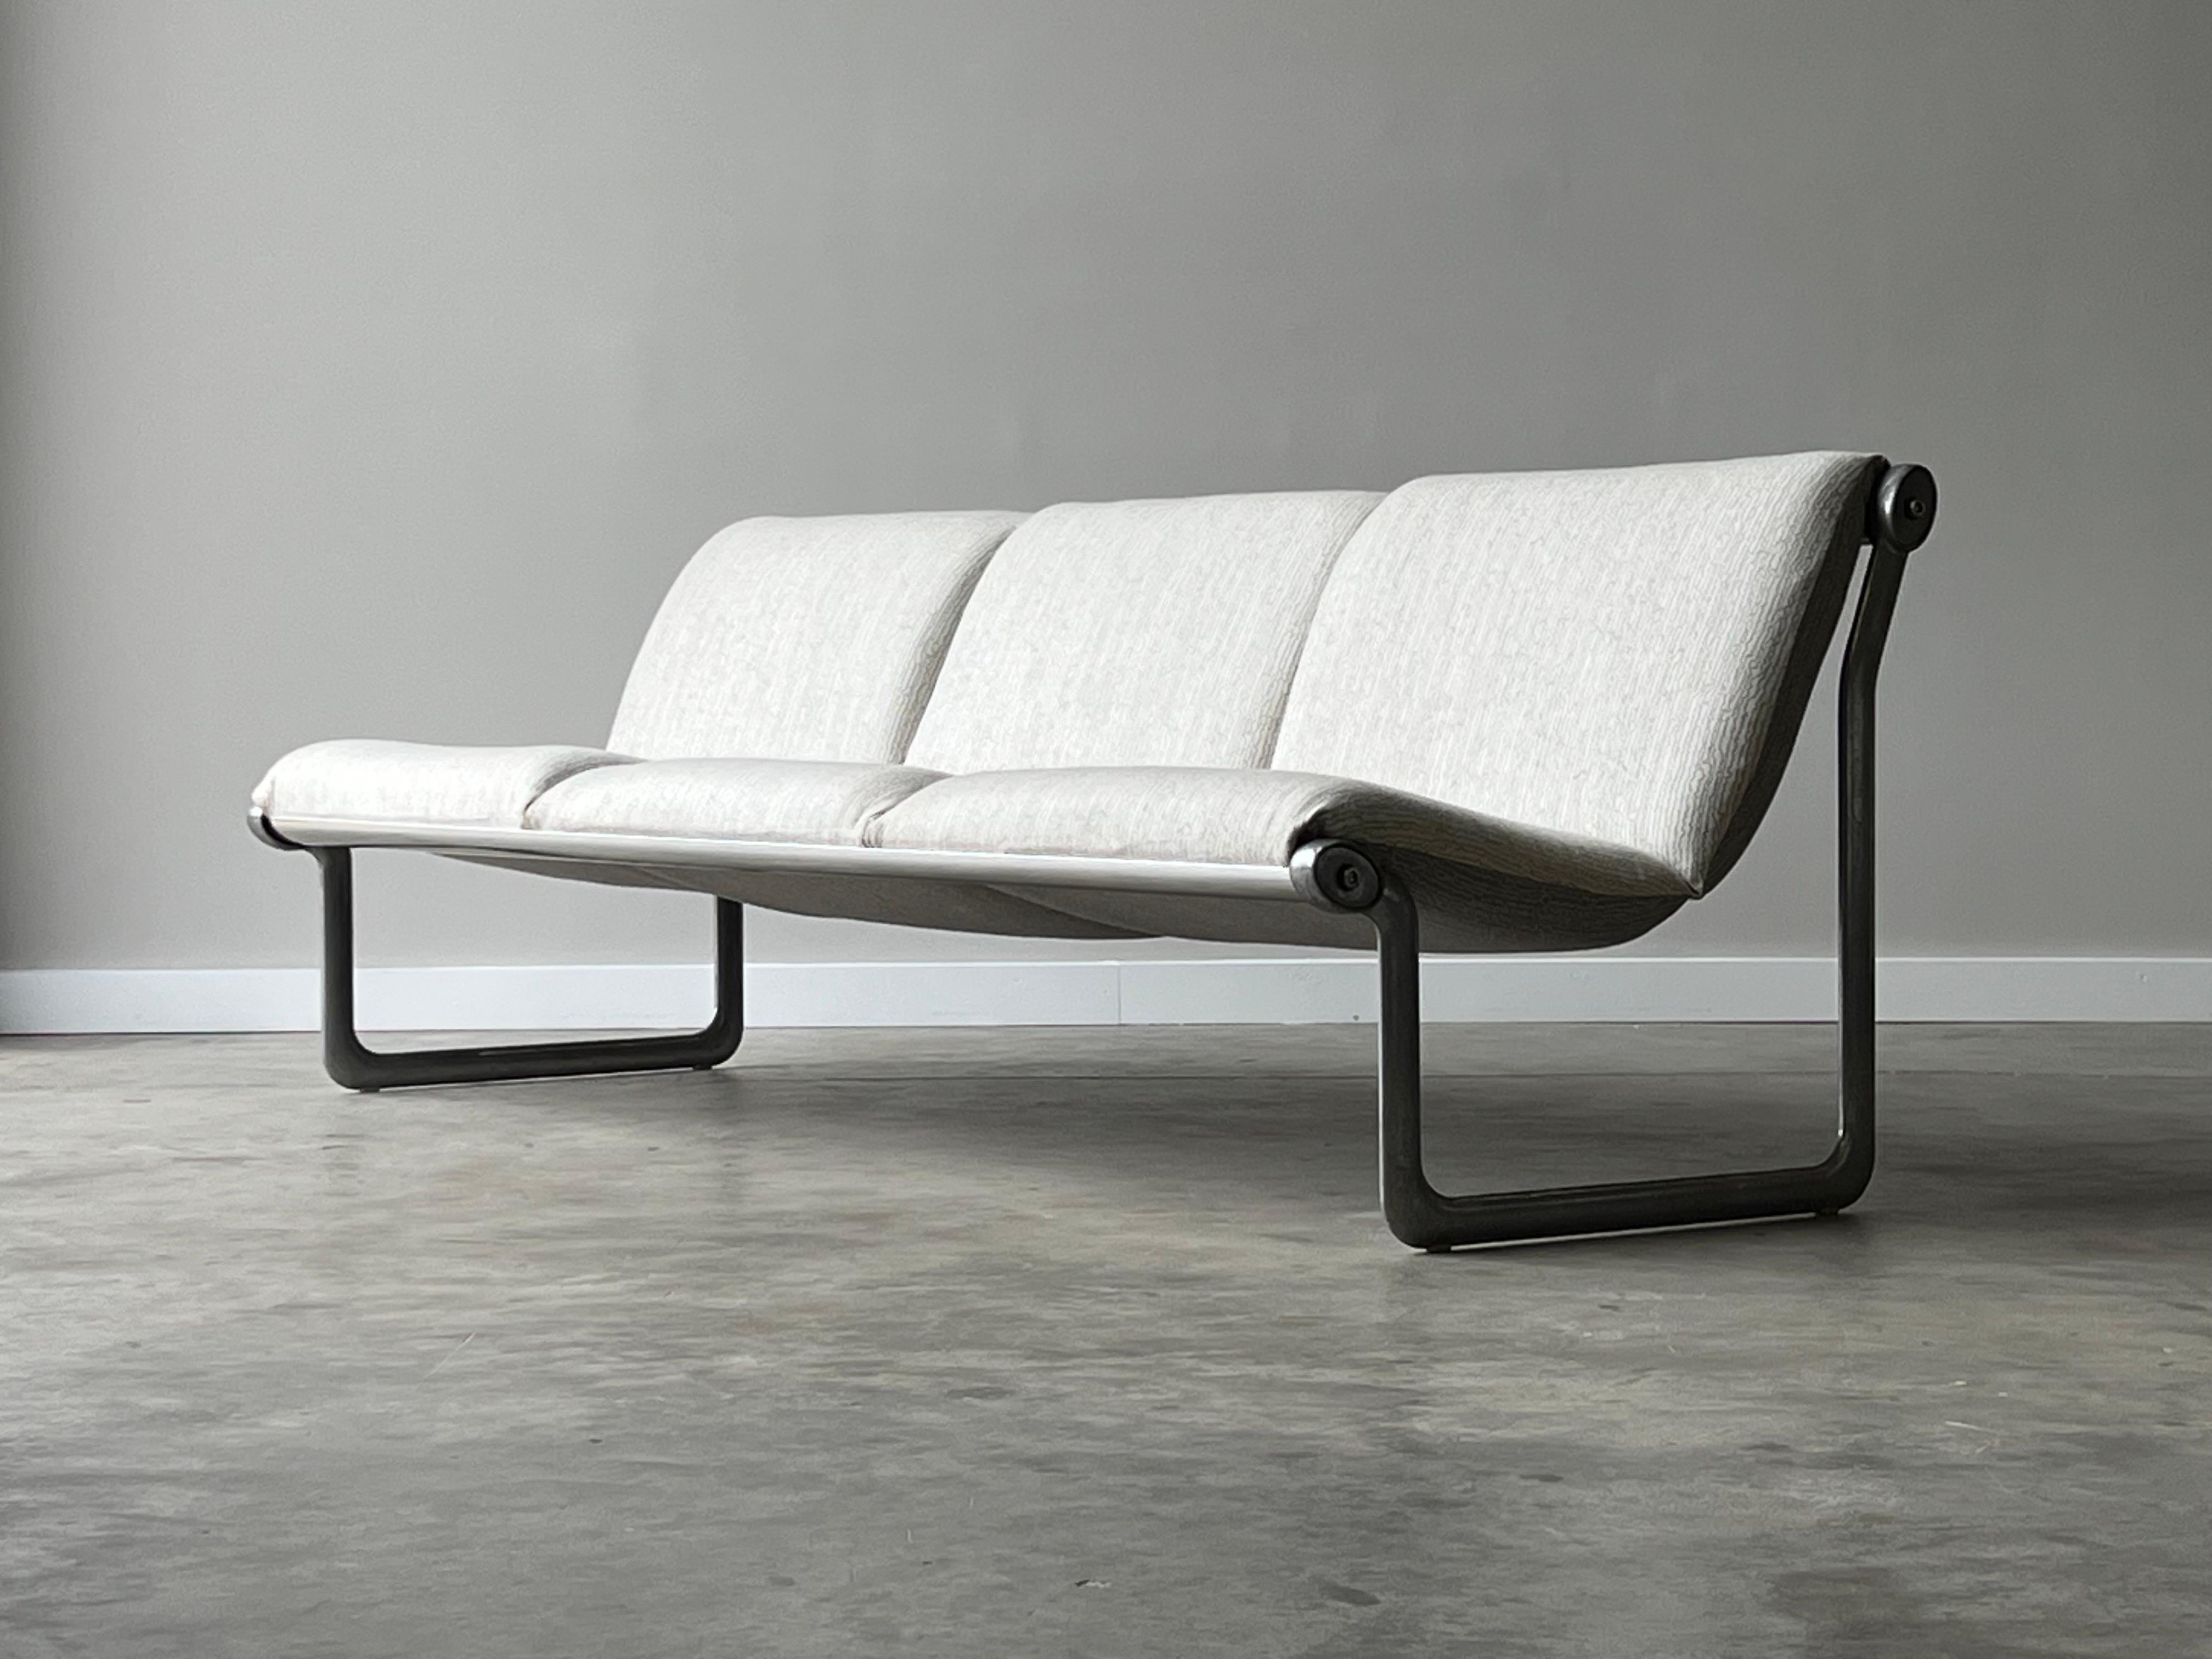 Two matching three-seat settee sofas. Designed by Bruce Hannah and Andrew Morrison for Knoll circa 1970s. These “sling” sofas have a sleek profile and versatile feel. Equipped with aluminum legs and chrome supports that the cushions float